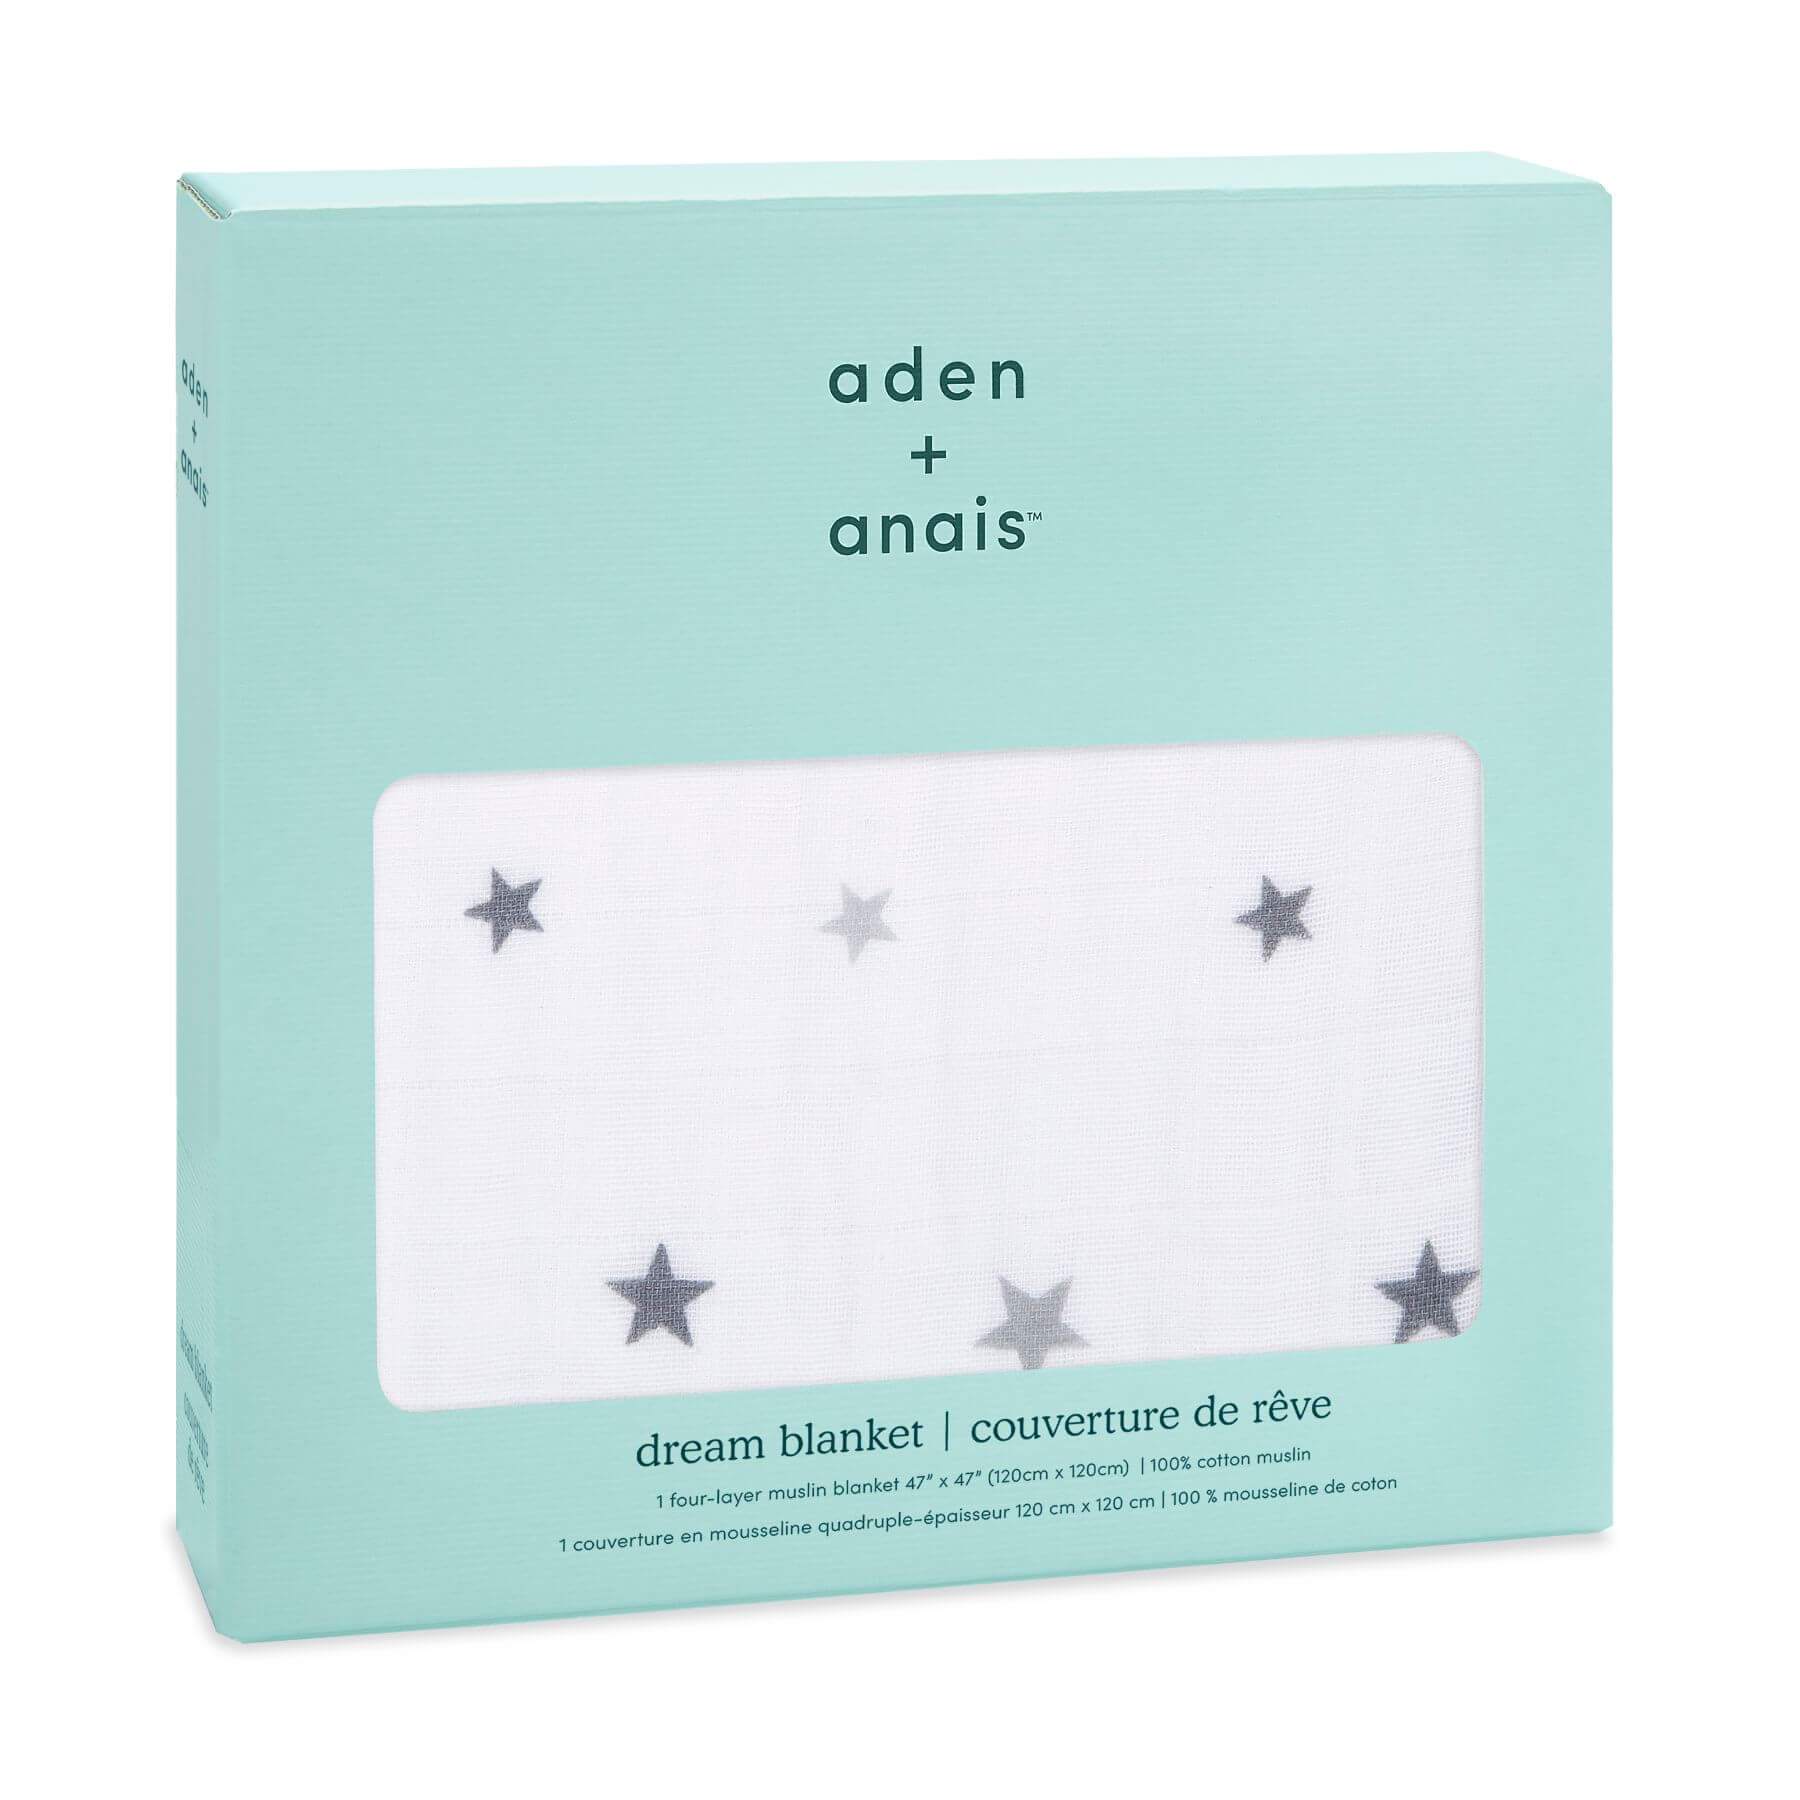 Aden & Anais Classic Dream Blanket - Twinkle